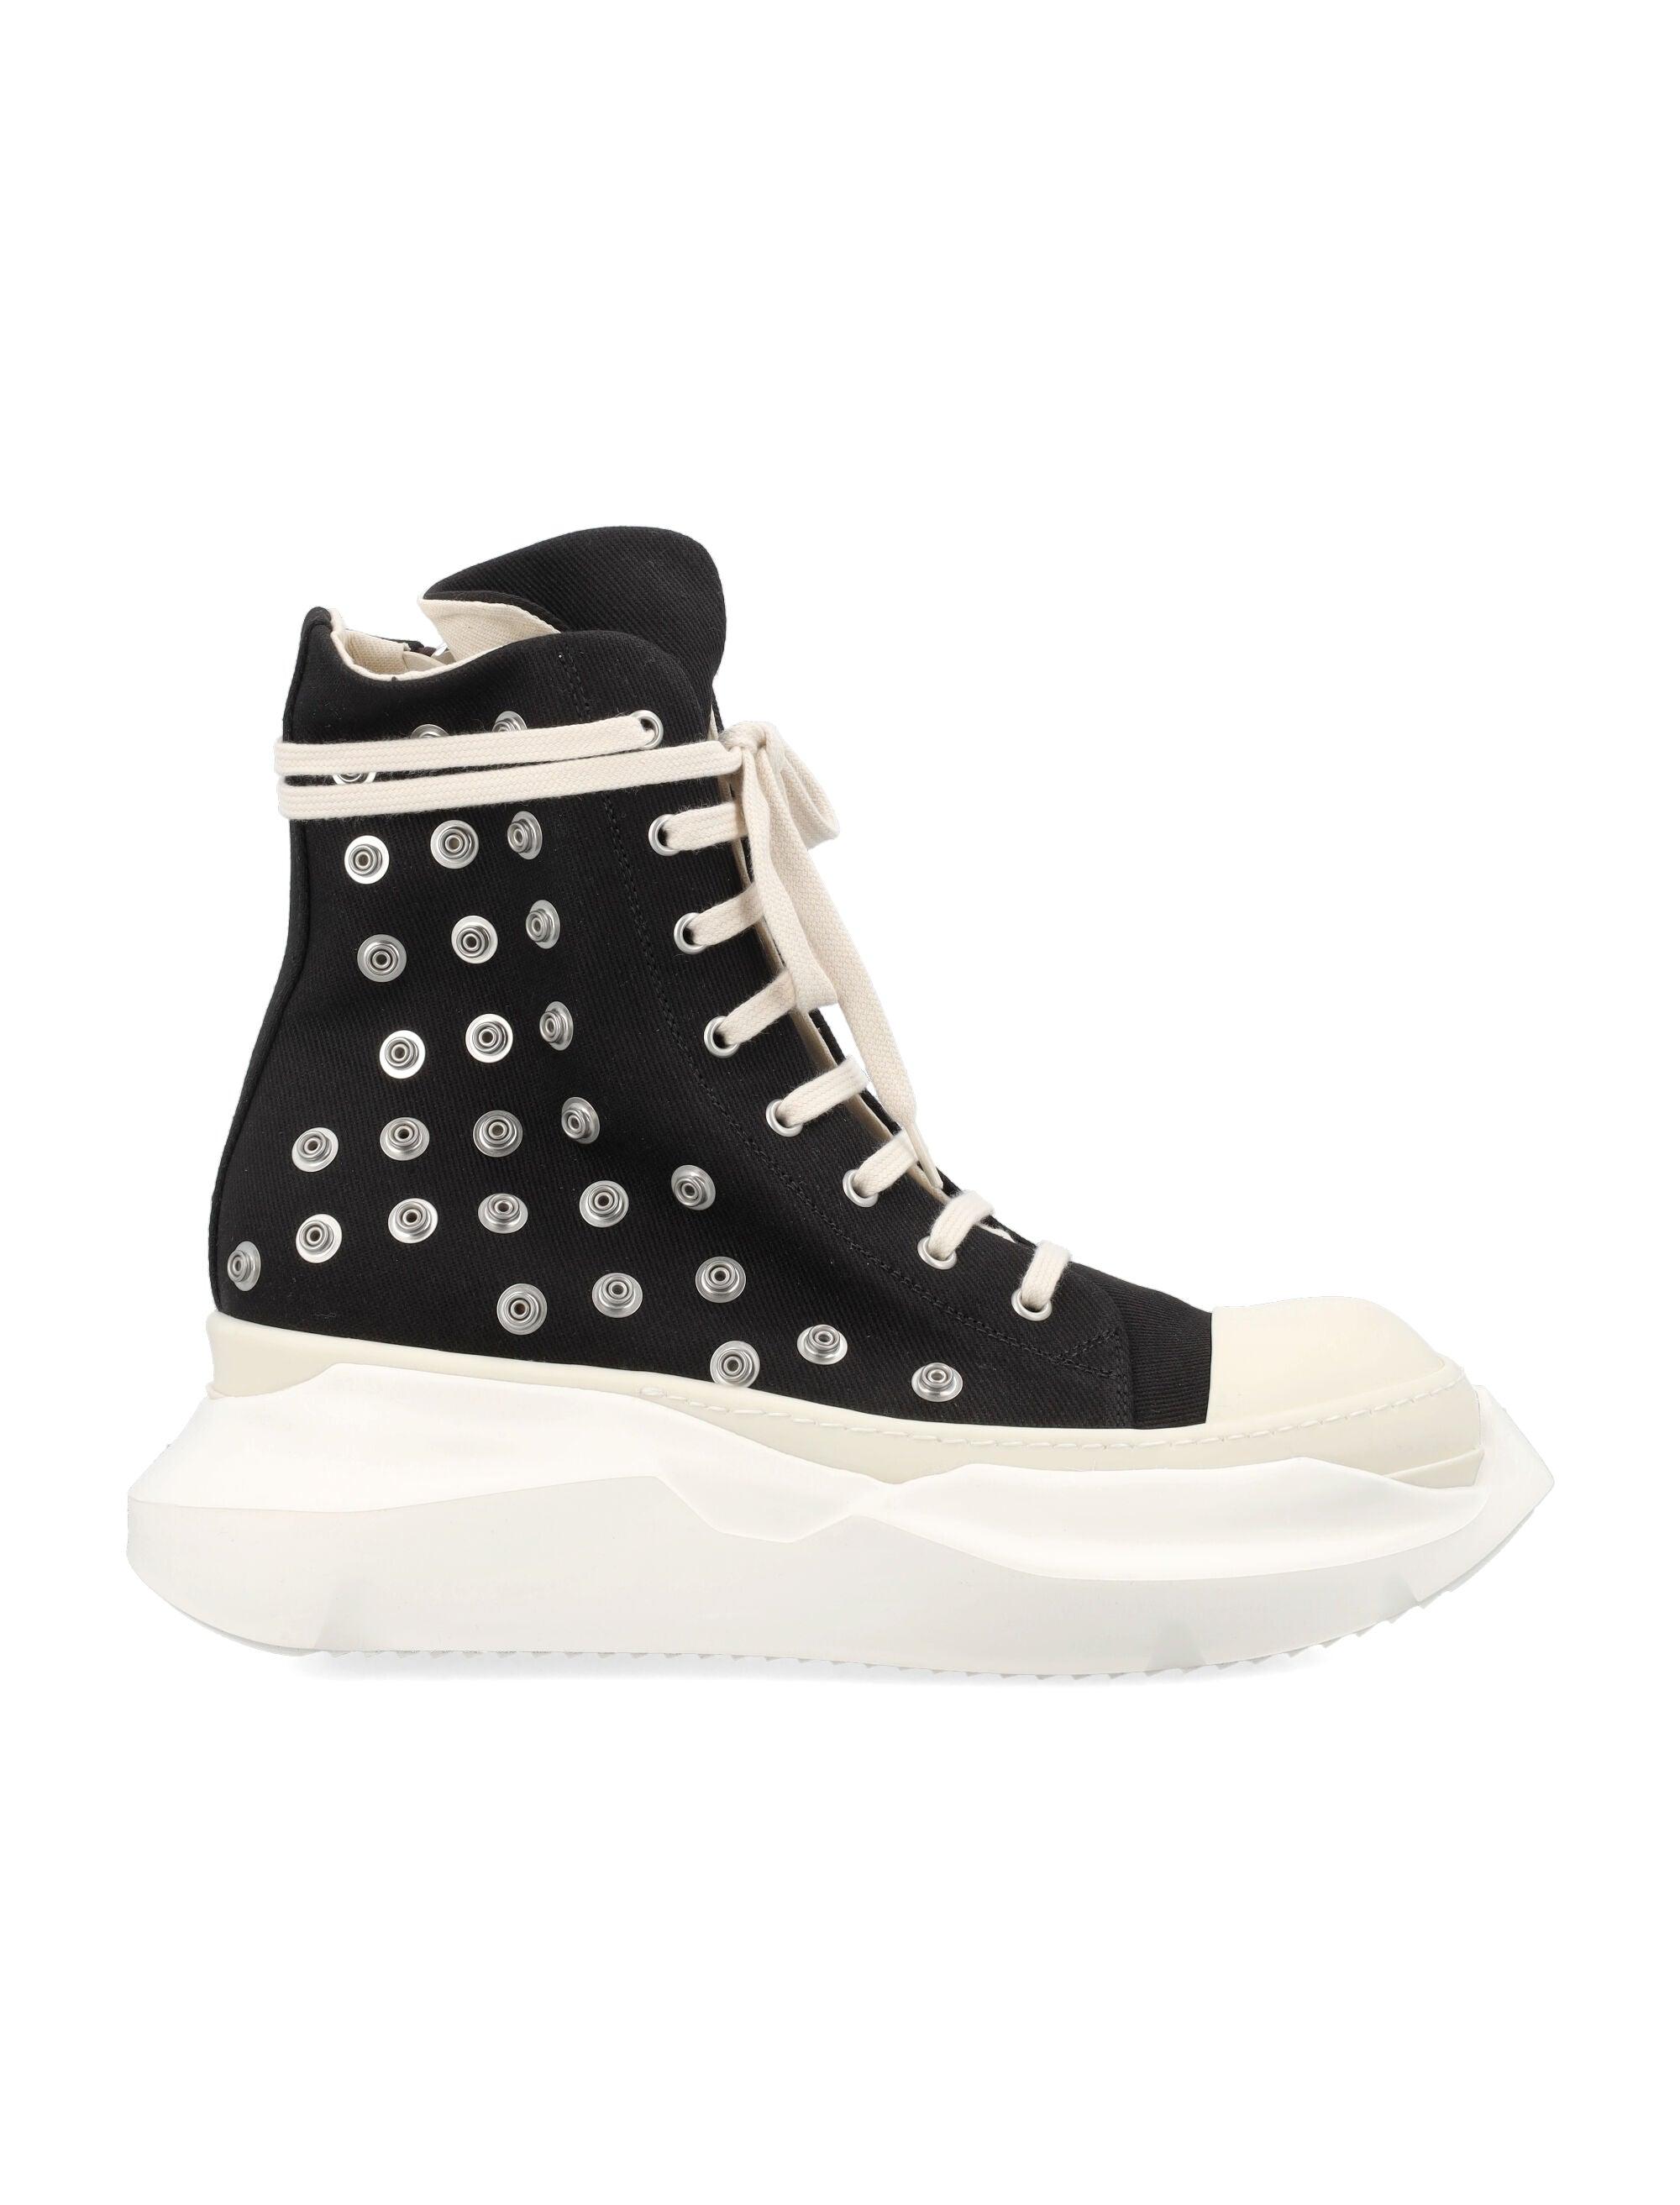 Rick Owens DRKSHDW Luxor Abstract High-top Sneakers in Black for